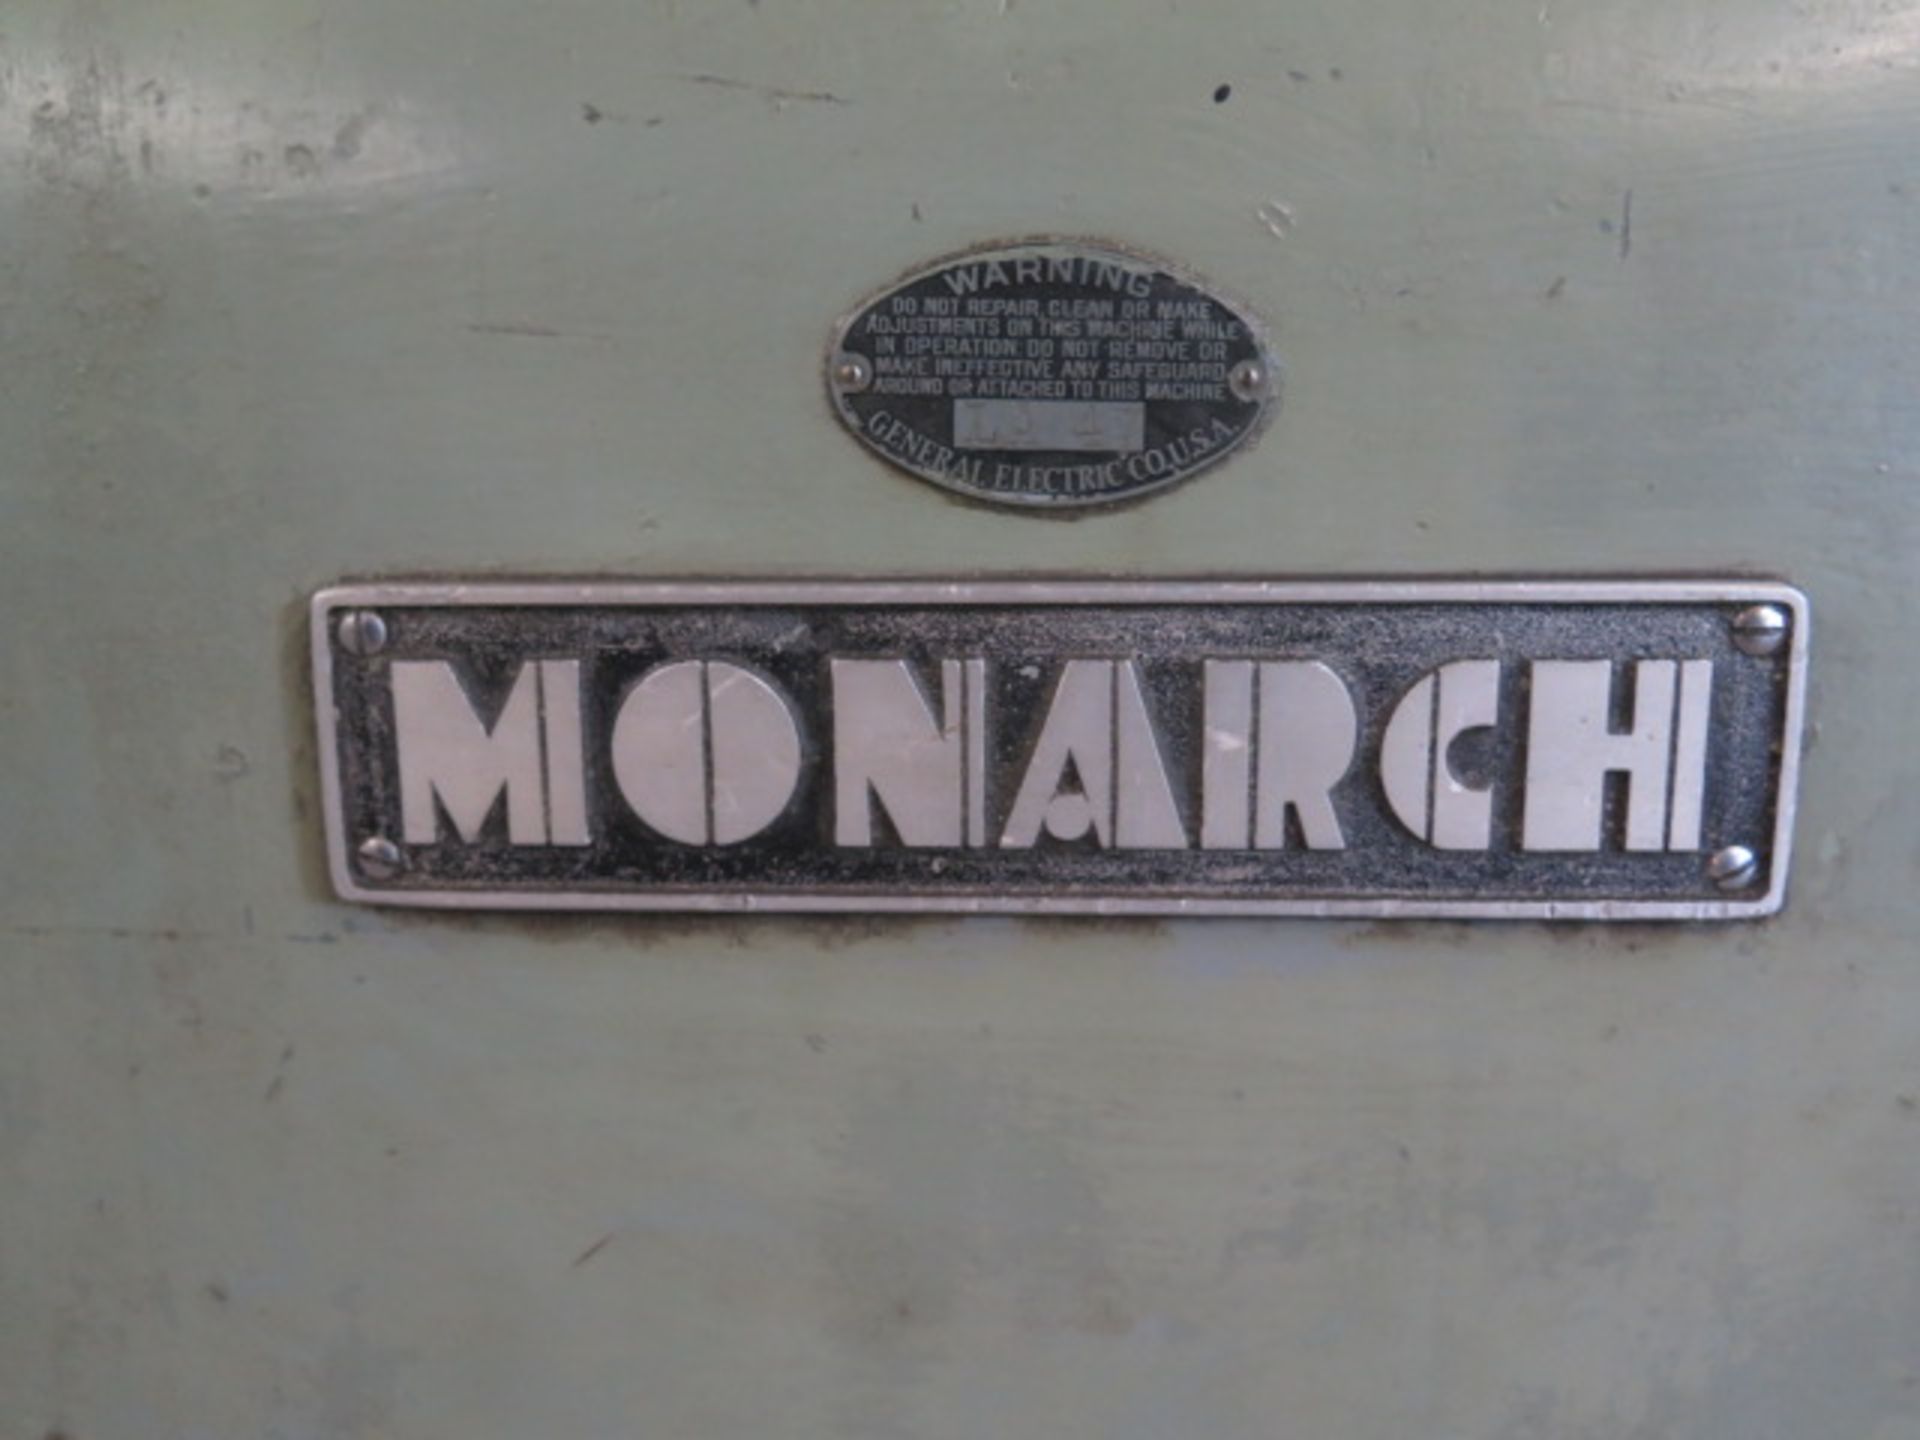 Monarch mdl. 10EE 12 ½” x 20” Tool Room Lathe s/n 28905 w/ 2500 Max RPM, Dial RPM Gage, Inch - Image 8 of 9